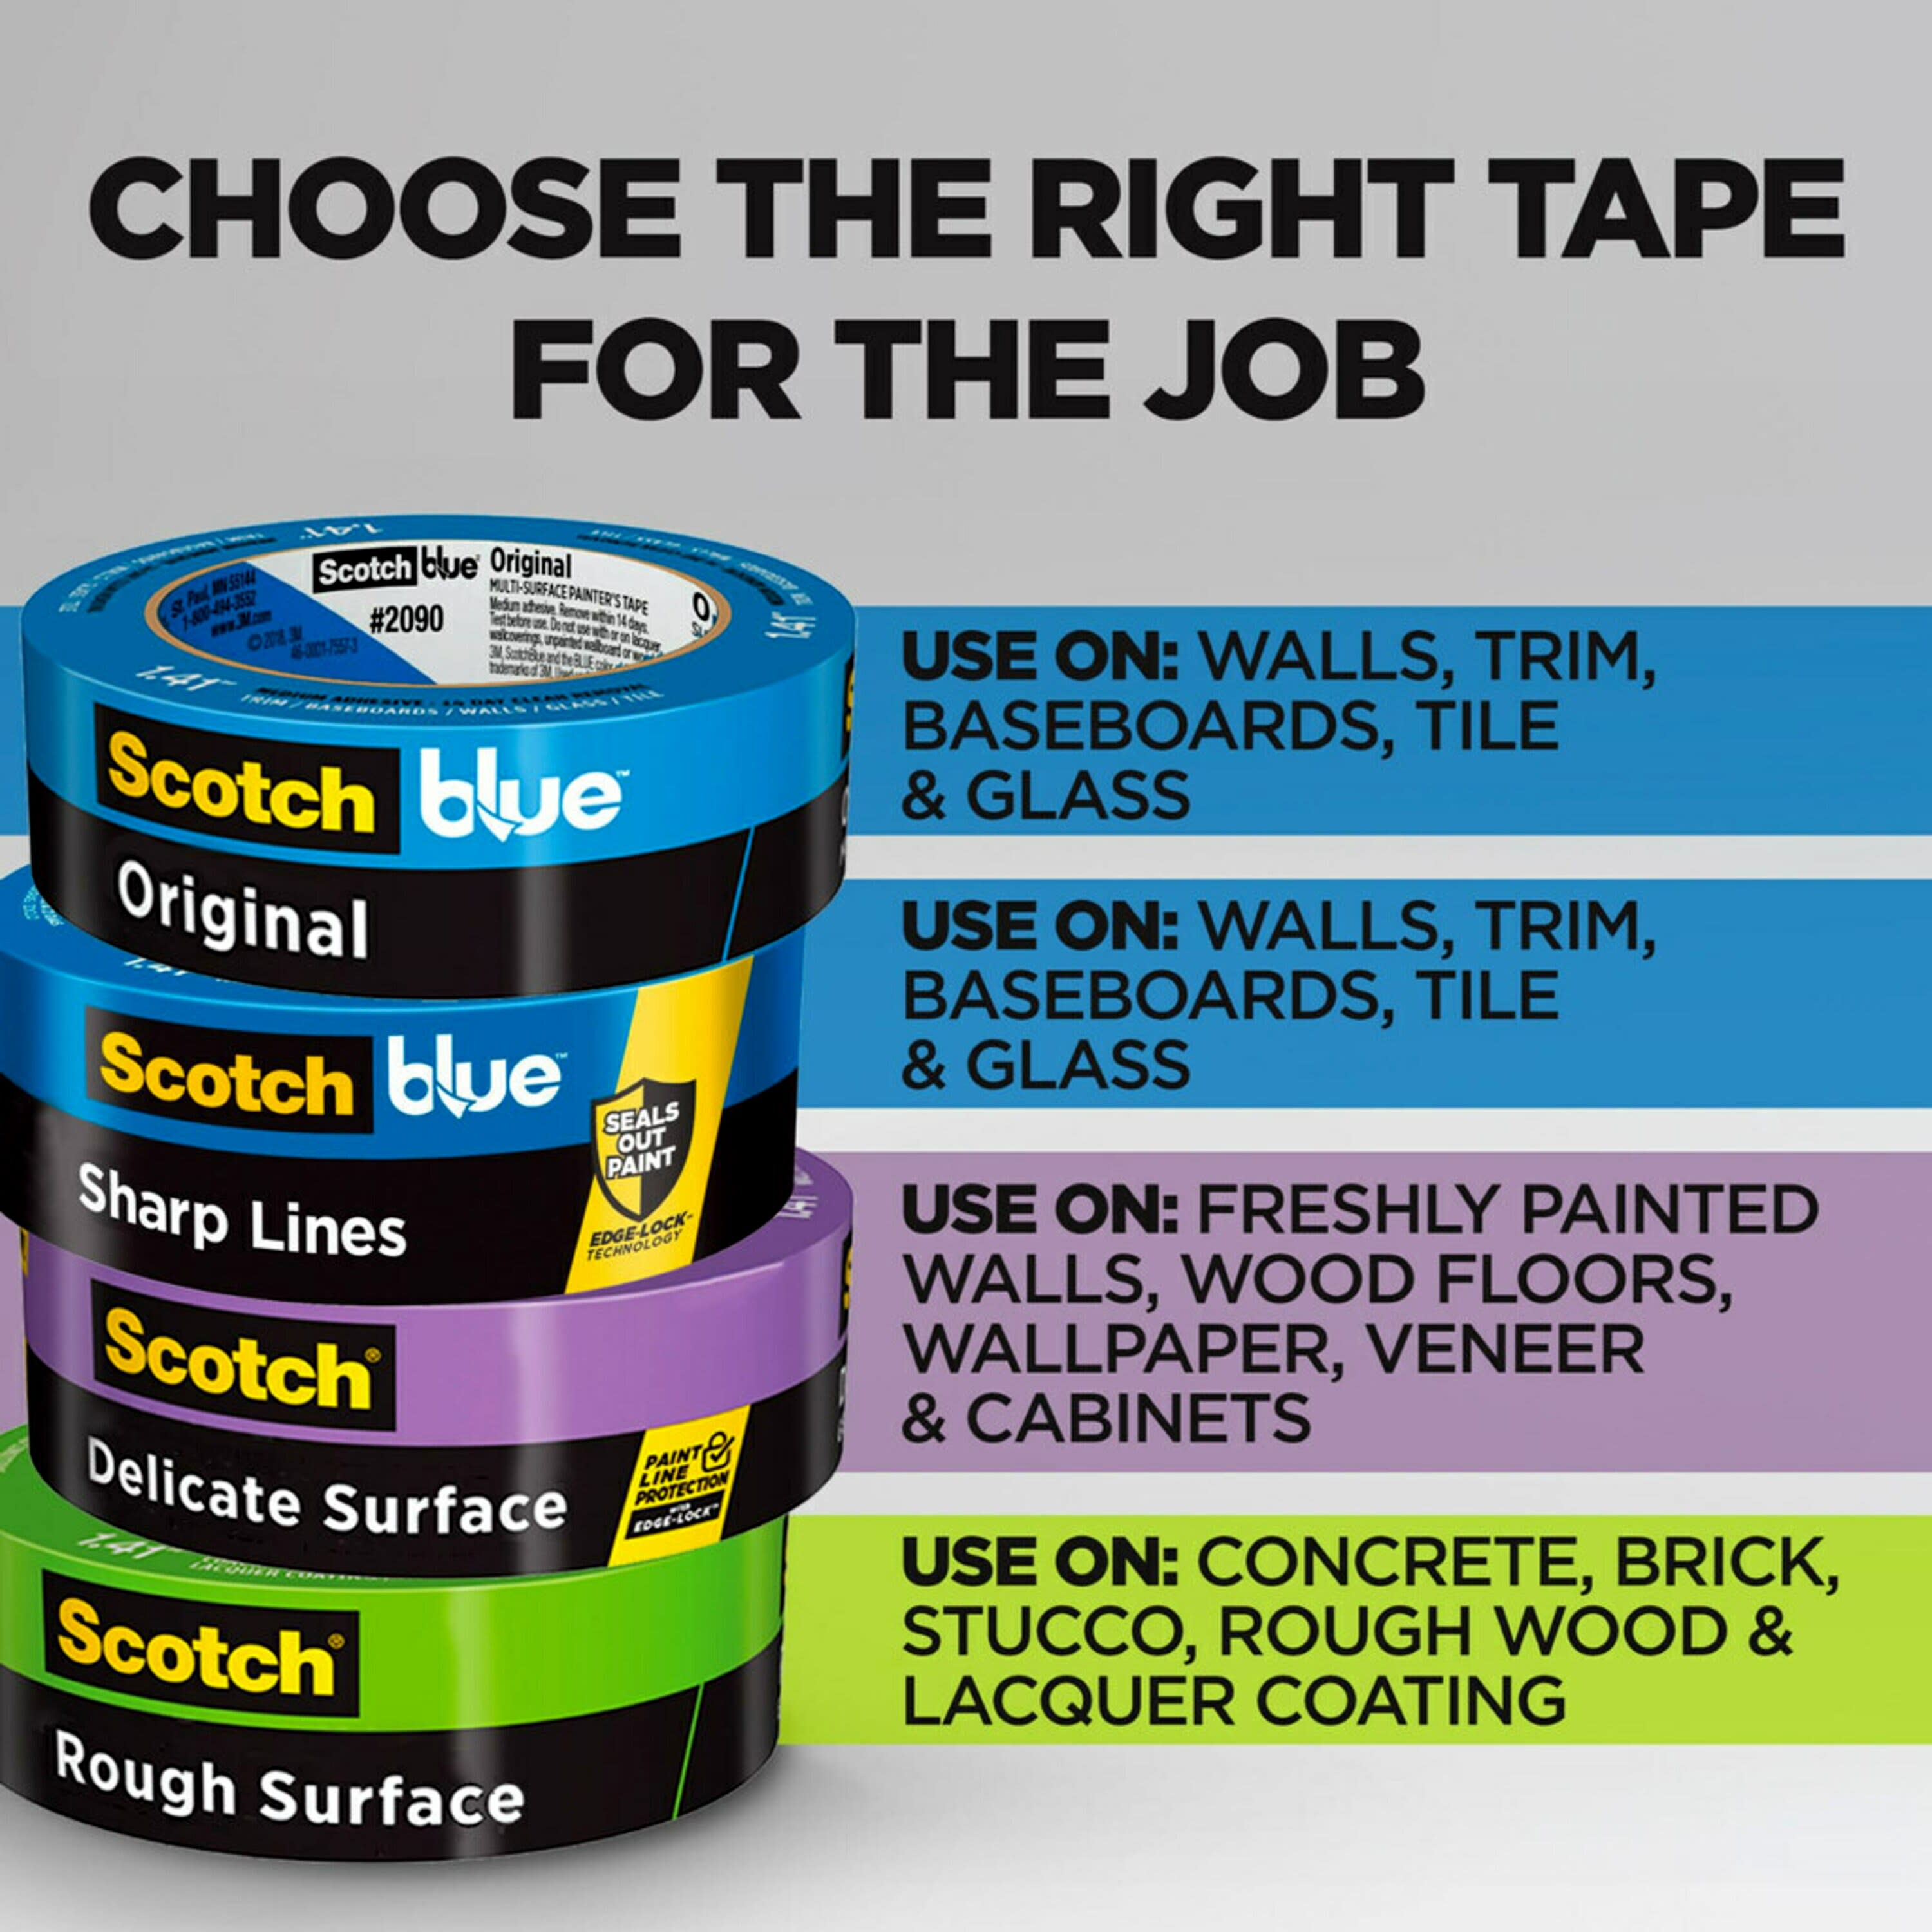 ScotchBlue Original Multi-Surface Painters Tape, Blue, 0.94 inches x 60 yards, 1 Roll - image 4 of 23